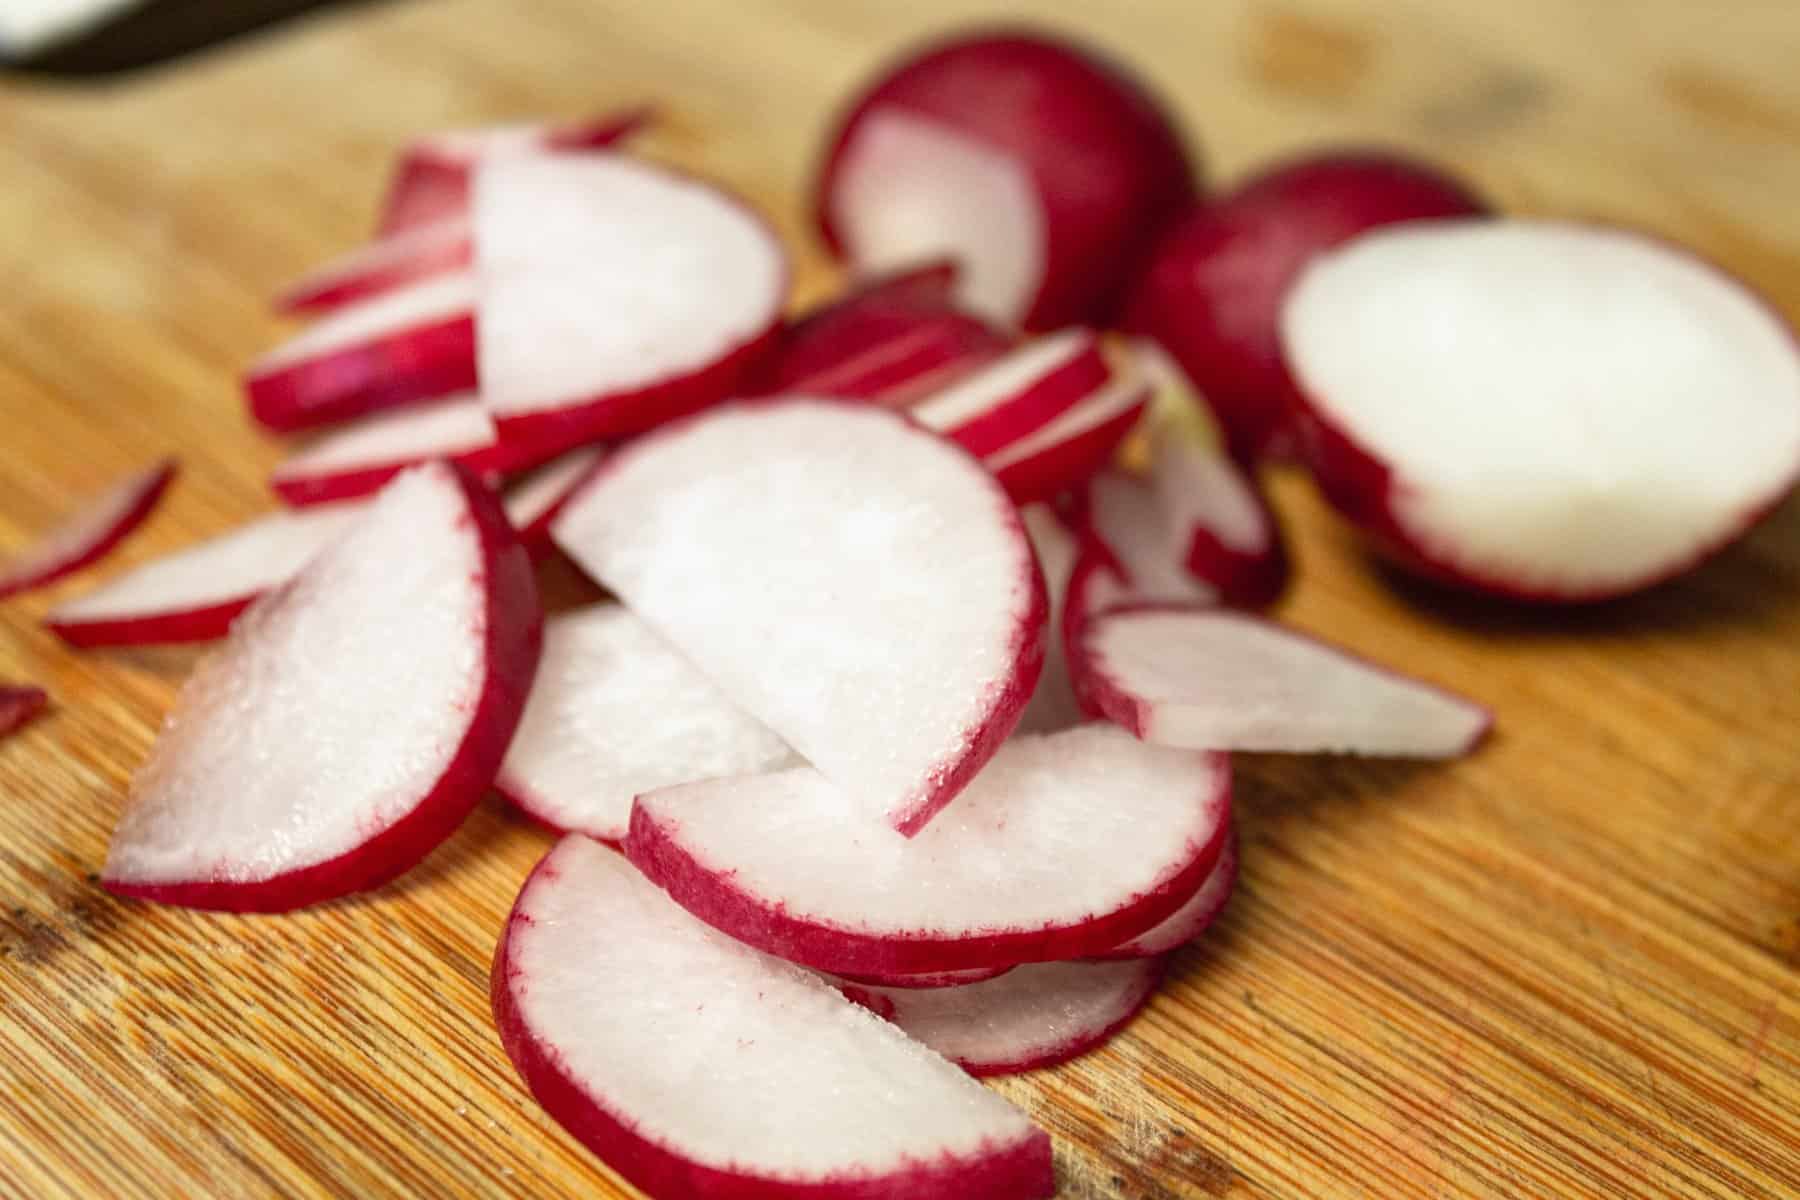 sliced radishes on wooden cutting board